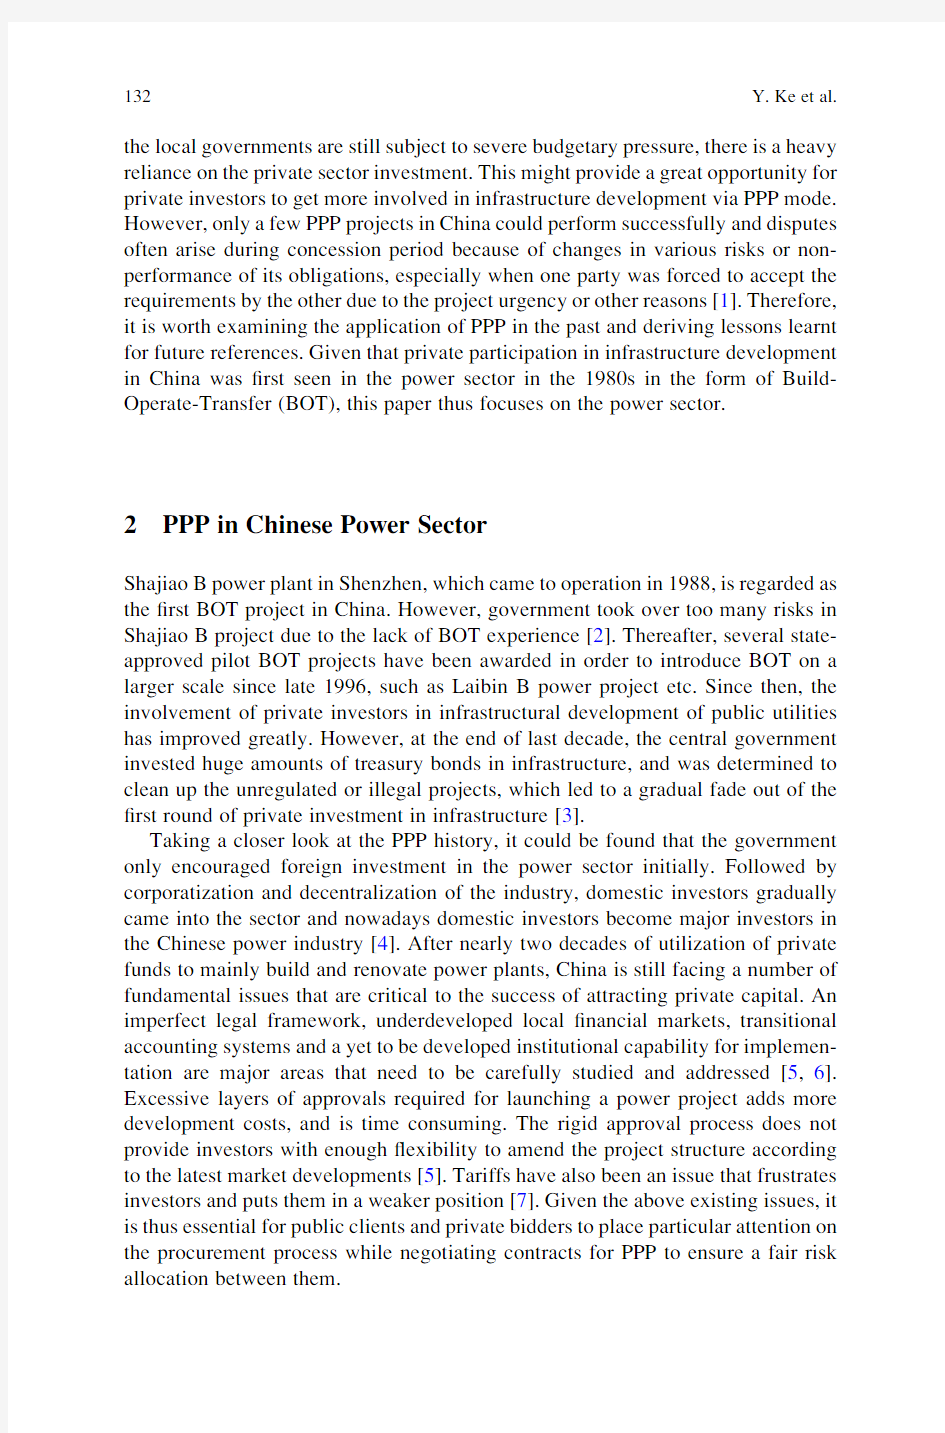 Equitable Risk Allocation in Chinese PPP Power Projects